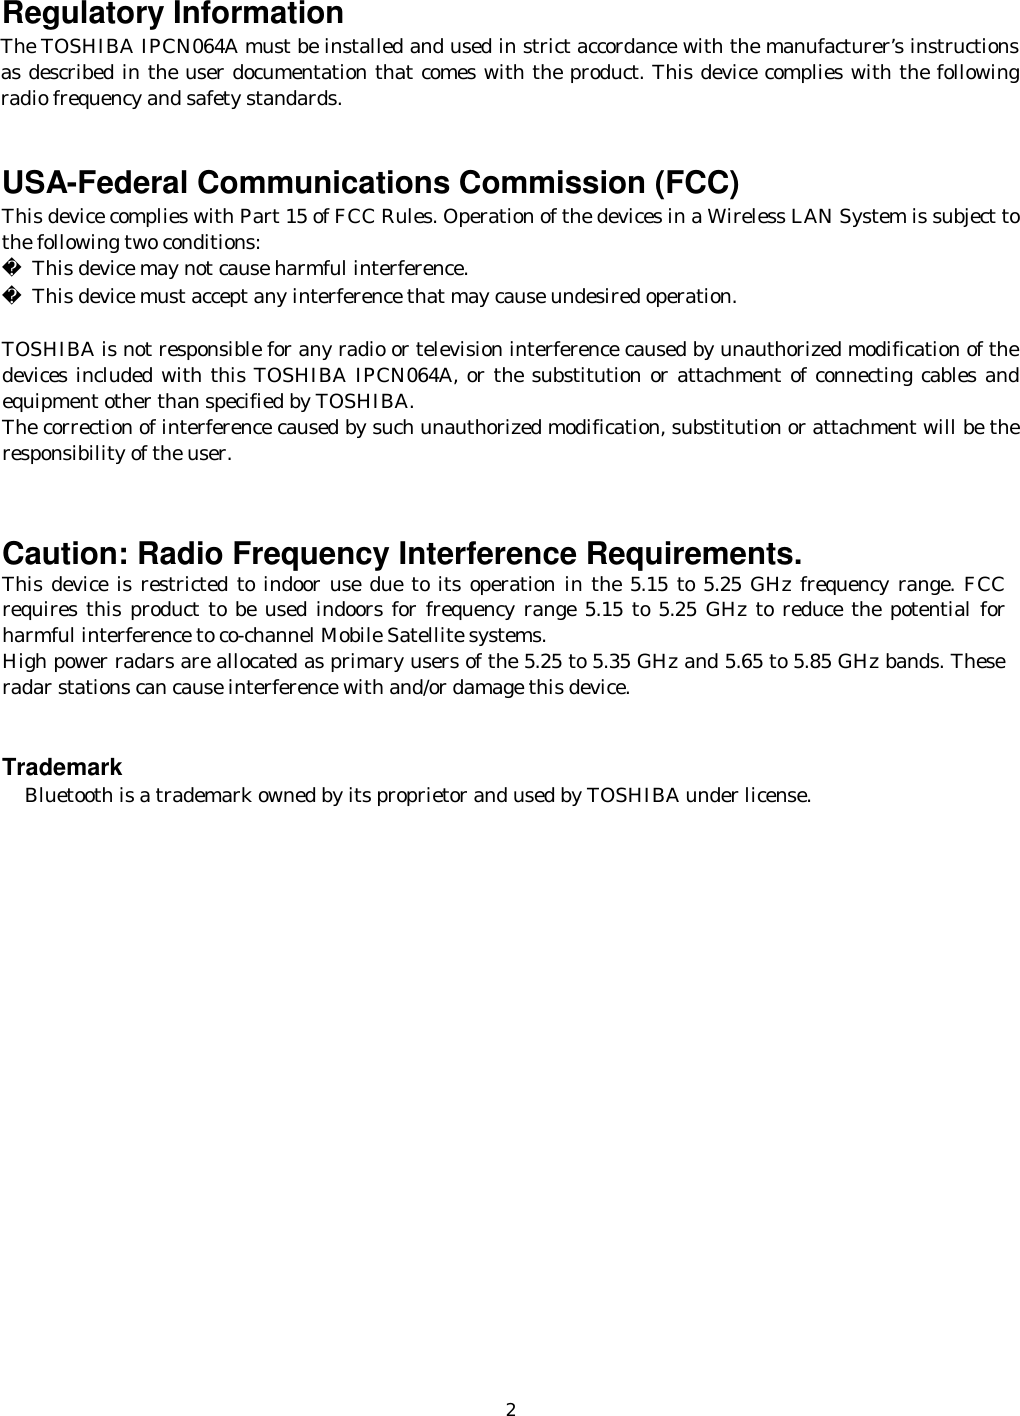    2Regulatory Information The TOSHIBA IPCN064A must be installed and used in strict accordance with the manufacturer’s instructions as described in the user documentation that comes with the product. This device complies with the following radio frequency and safety standards.   USA-Federal Communications Commission (FCC)  This device complies with Part 15 of FCC Rules. Operation of the devices in a Wireless LAN System is subject to the following two conditions:   This device may not cause harmful interference.   This device must accept any interference that may cause undesired operation.  TOSHIBA is not responsible for any radio or television interference caused by unauthorized modification of the devices included with this TOSHIBA IPCN064A, or the substitution or attachment of connecting cables and equipment other than specified by TOSHIBA. The correction of interference caused by such unauthorized modification, substitution or attachment will be the responsibility of the user.   Caution: Radio Frequency Interference Requirements.  This device is restricted to indoor use due to its operation in the 5.15 to 5.25 GHz frequency range. FCC requires this product to be used indoors for frequency range 5.15 to 5.25 GHz to reduce the potential for harmful interference to co-channel Mobile Satellite systems. High power radars are allocated as primary users of the 5.25 to 5.35 GHz and 5.65 to 5.85 GHz bands. These radar stations can cause interference with and/or damage this device.    Trademark     Bluetooth is a trademark owned by its proprietor and used by TOSHIBA under license. 